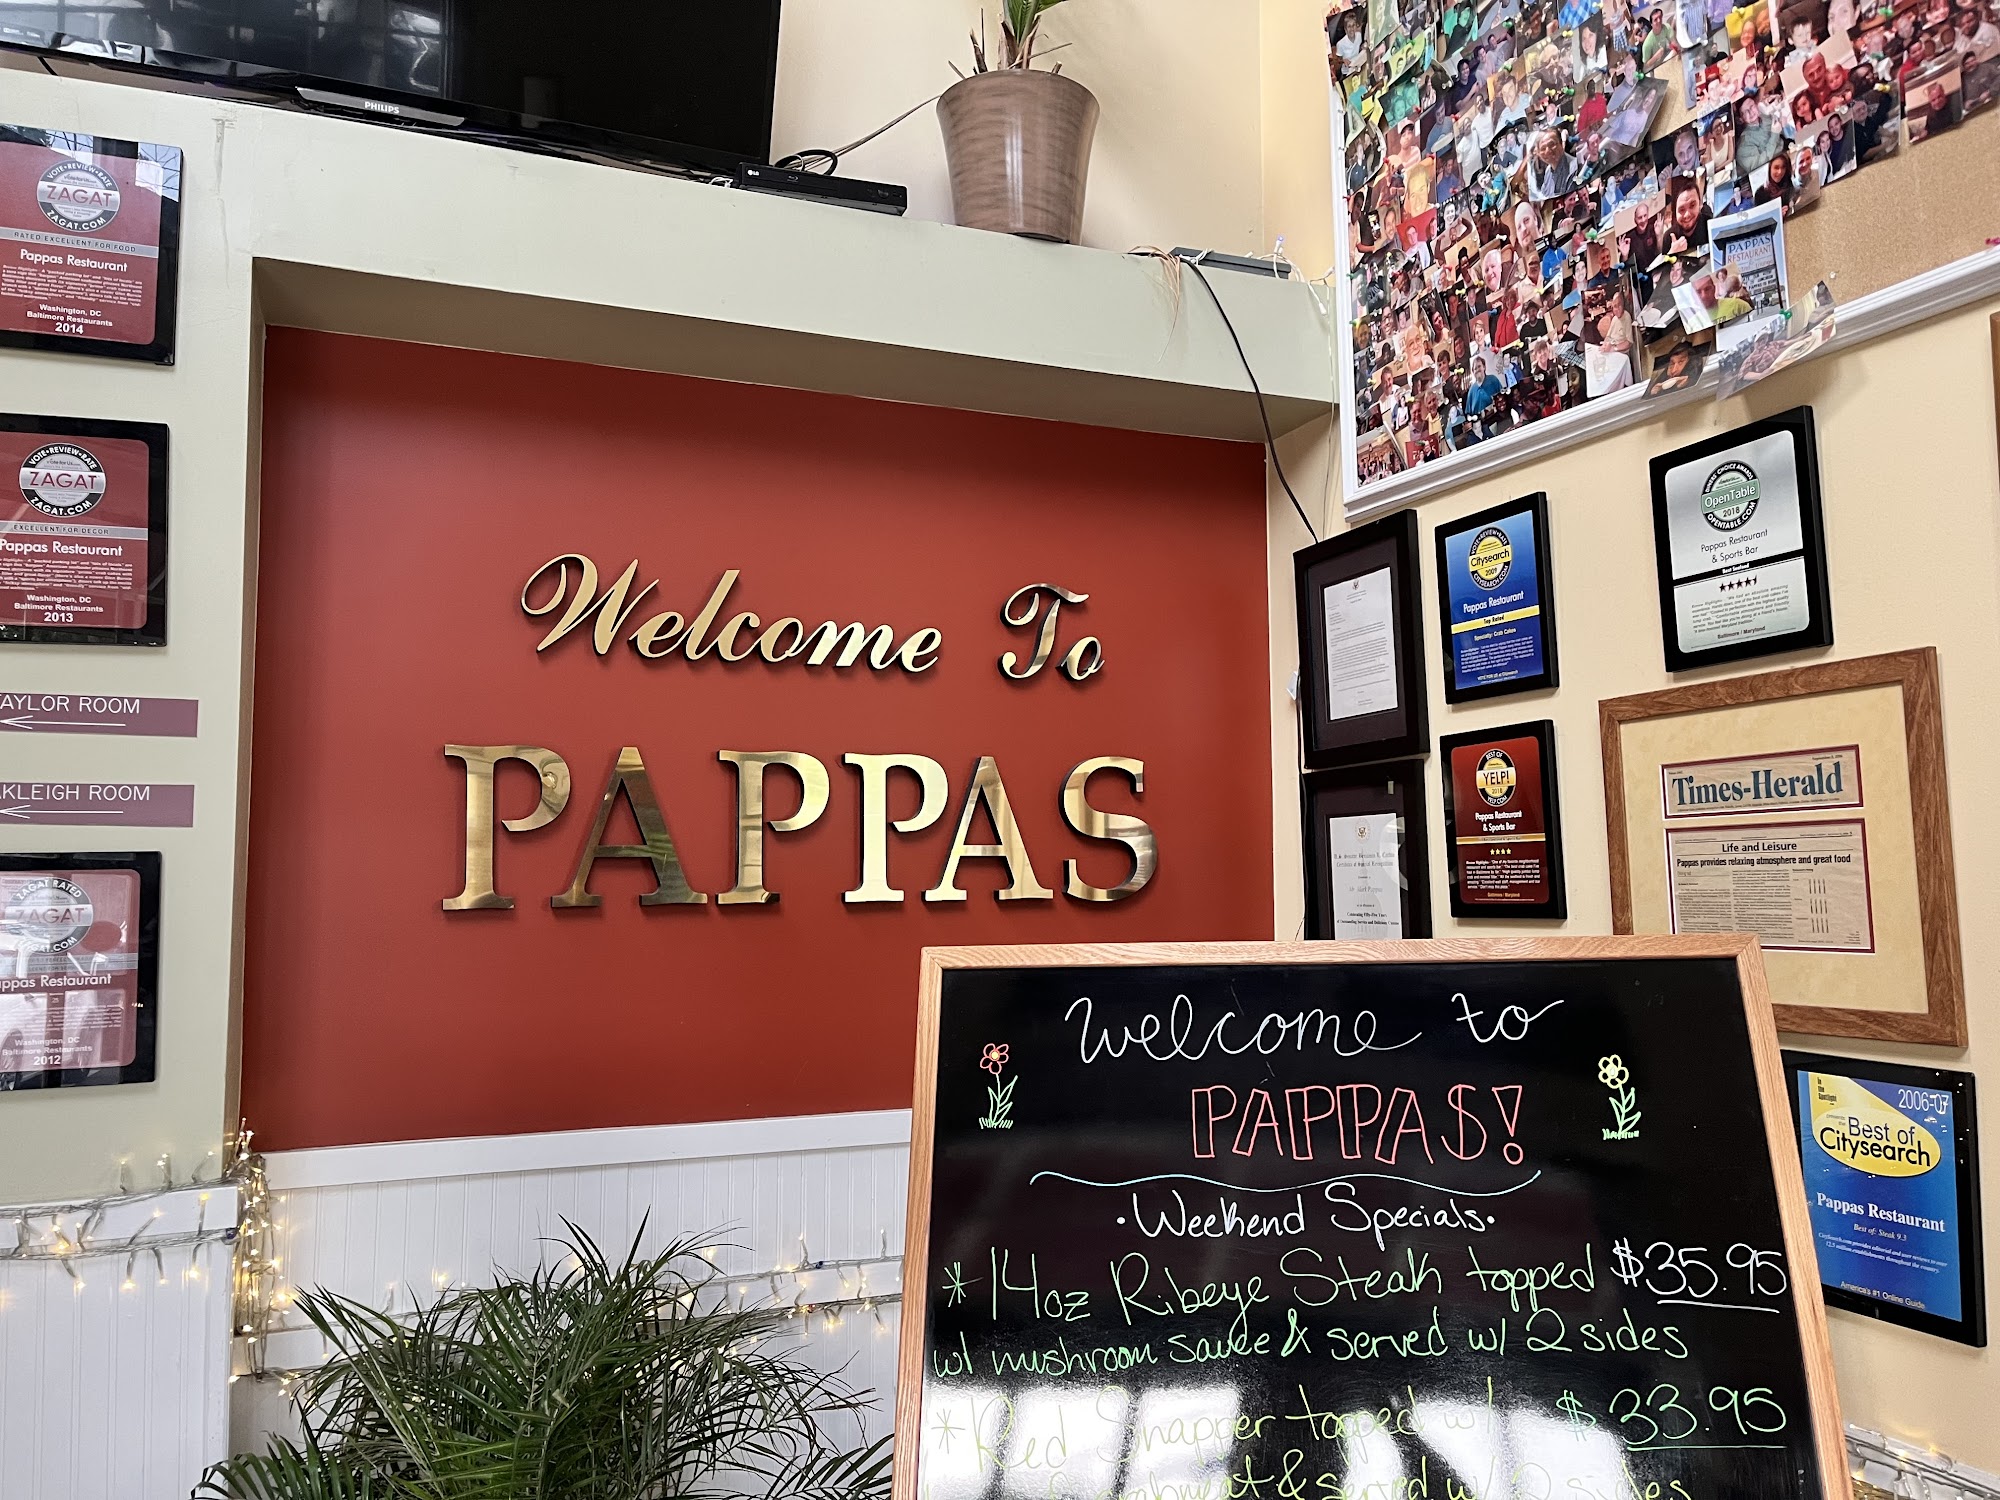 Pappas Restaurant and Sports Bar